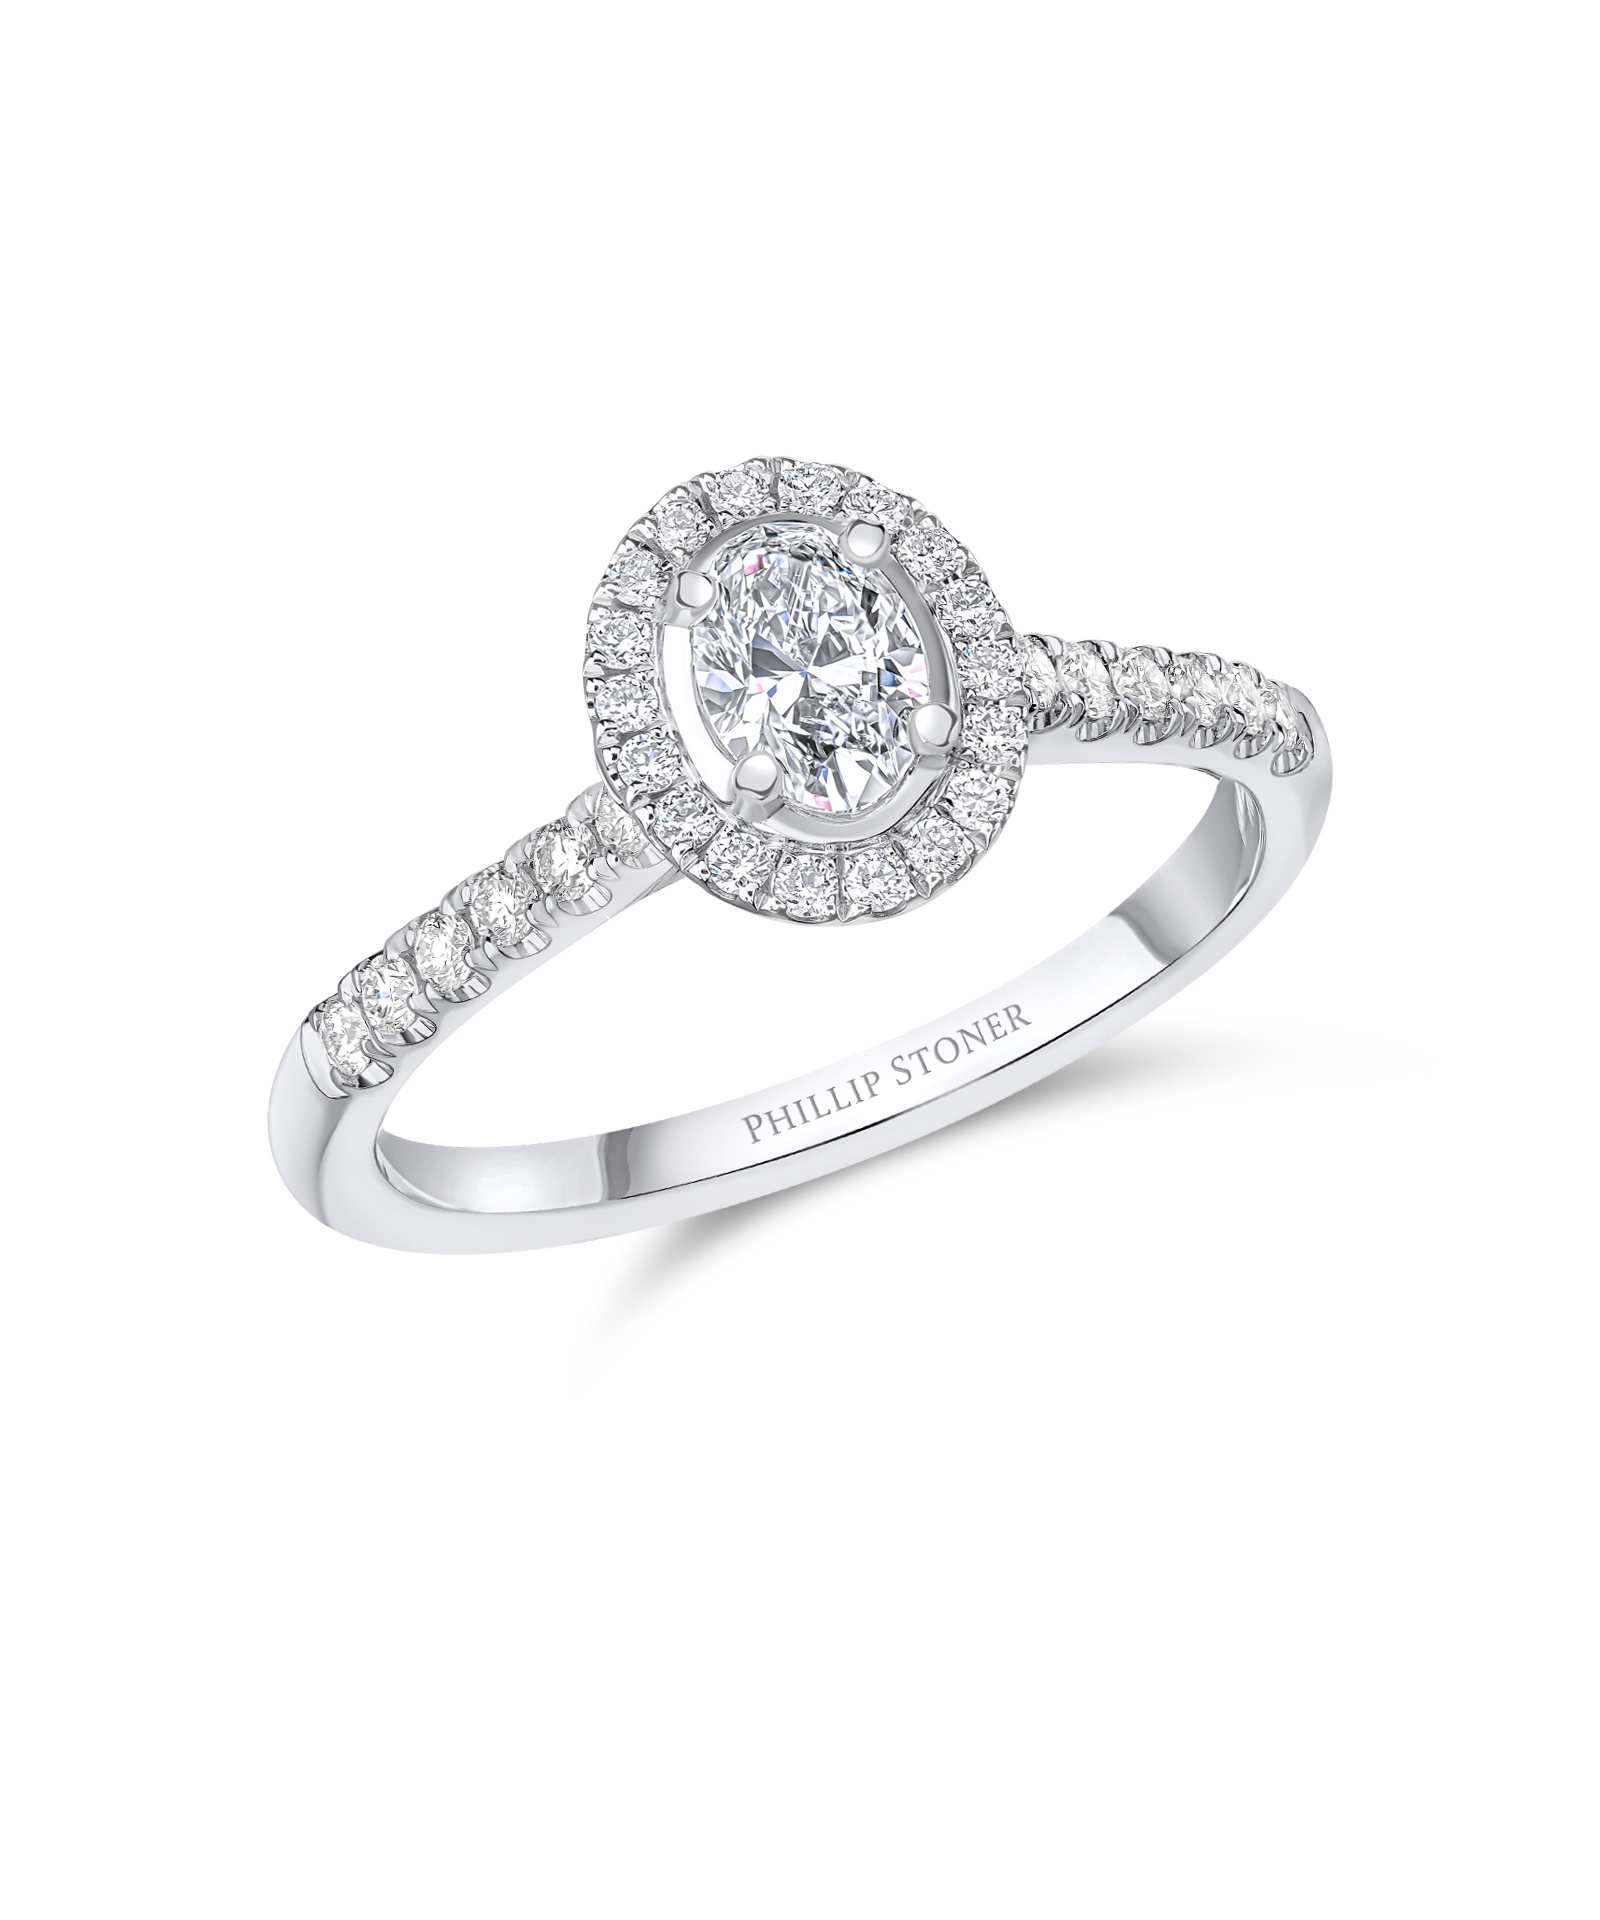 0.30ct Oval Cut Diamond Cluster Engagement Ring - Phillip Stoner The Jeweller